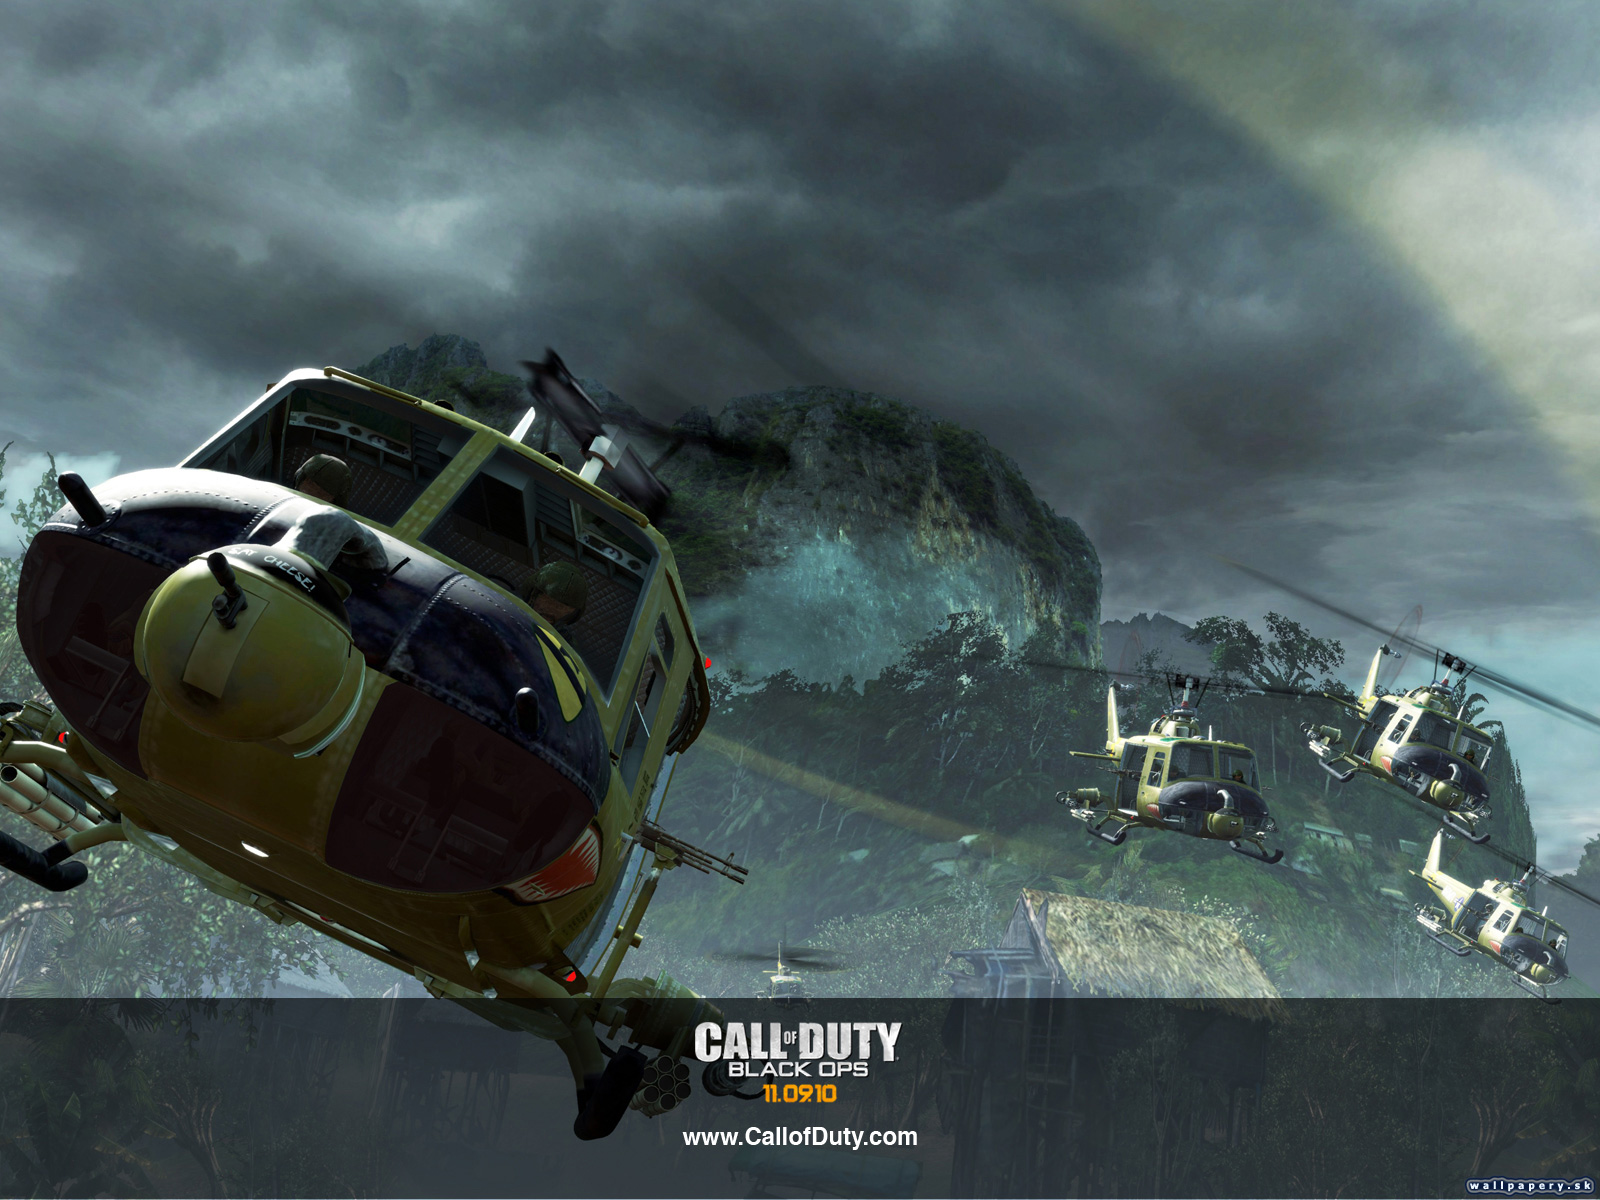 Call of Duty: Black Ops - wallpaper 15